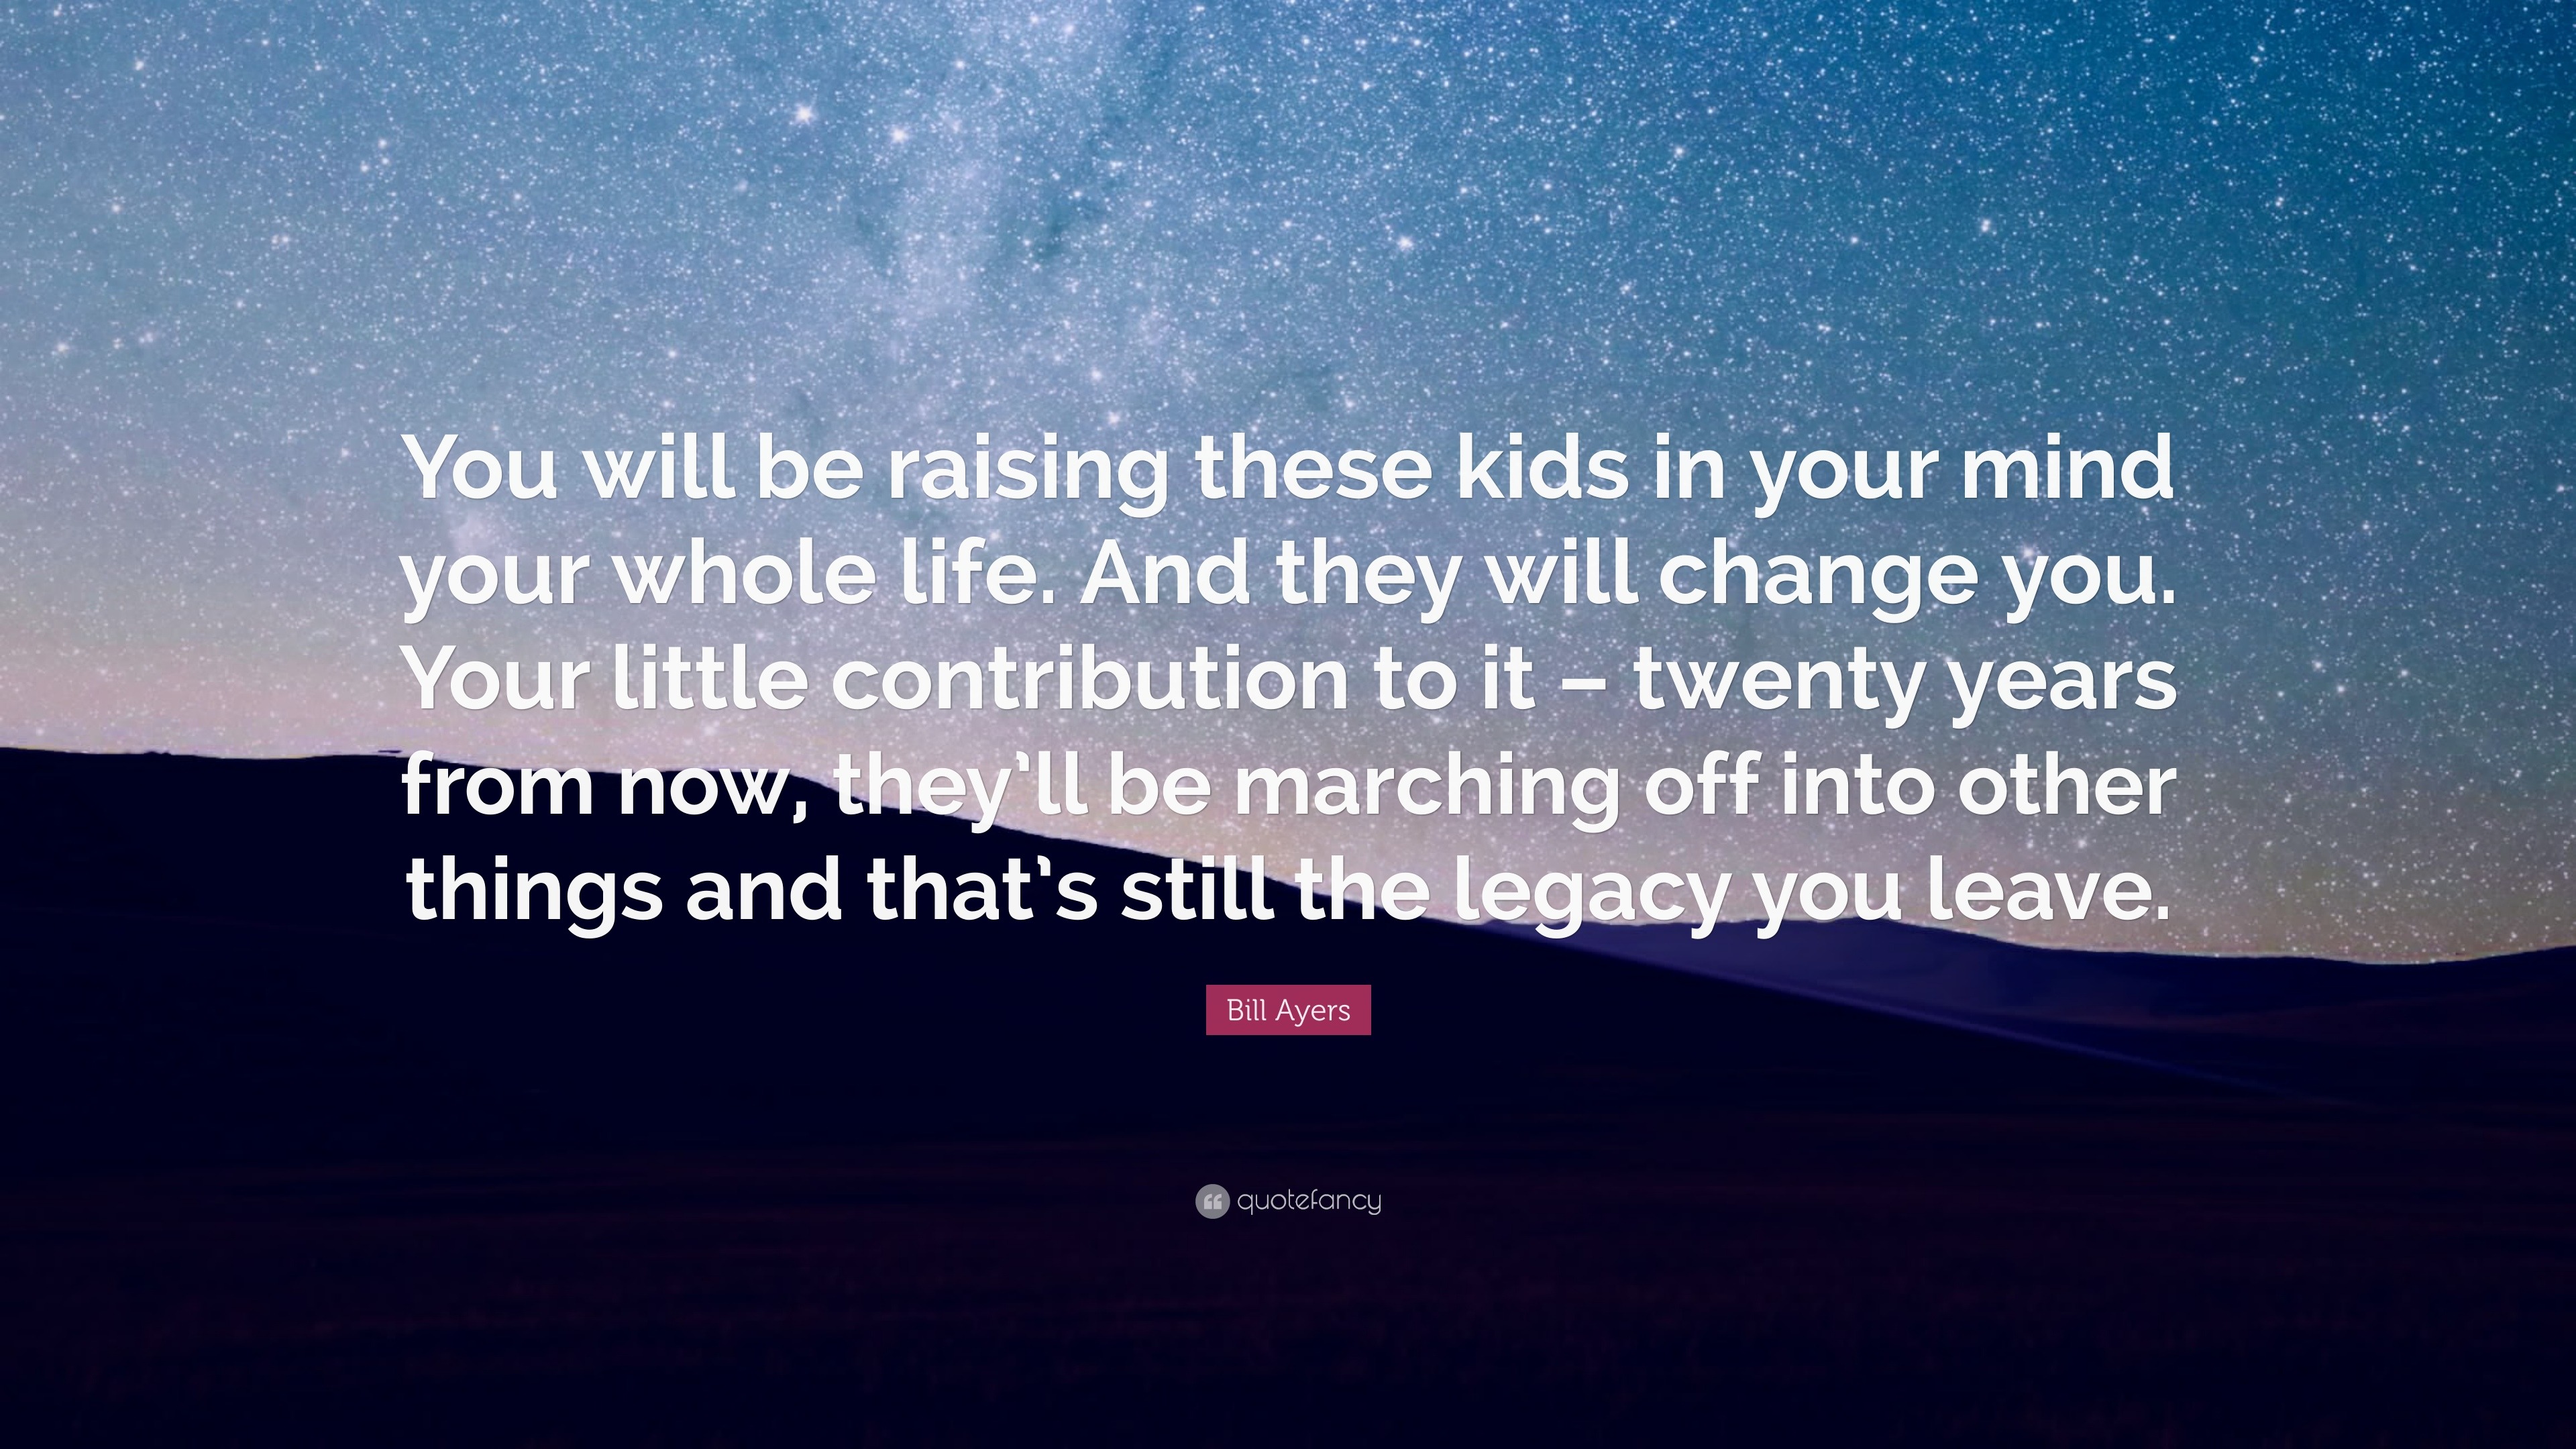 Bill Ayers Quote: “You will be raising these kids in your mind your ...